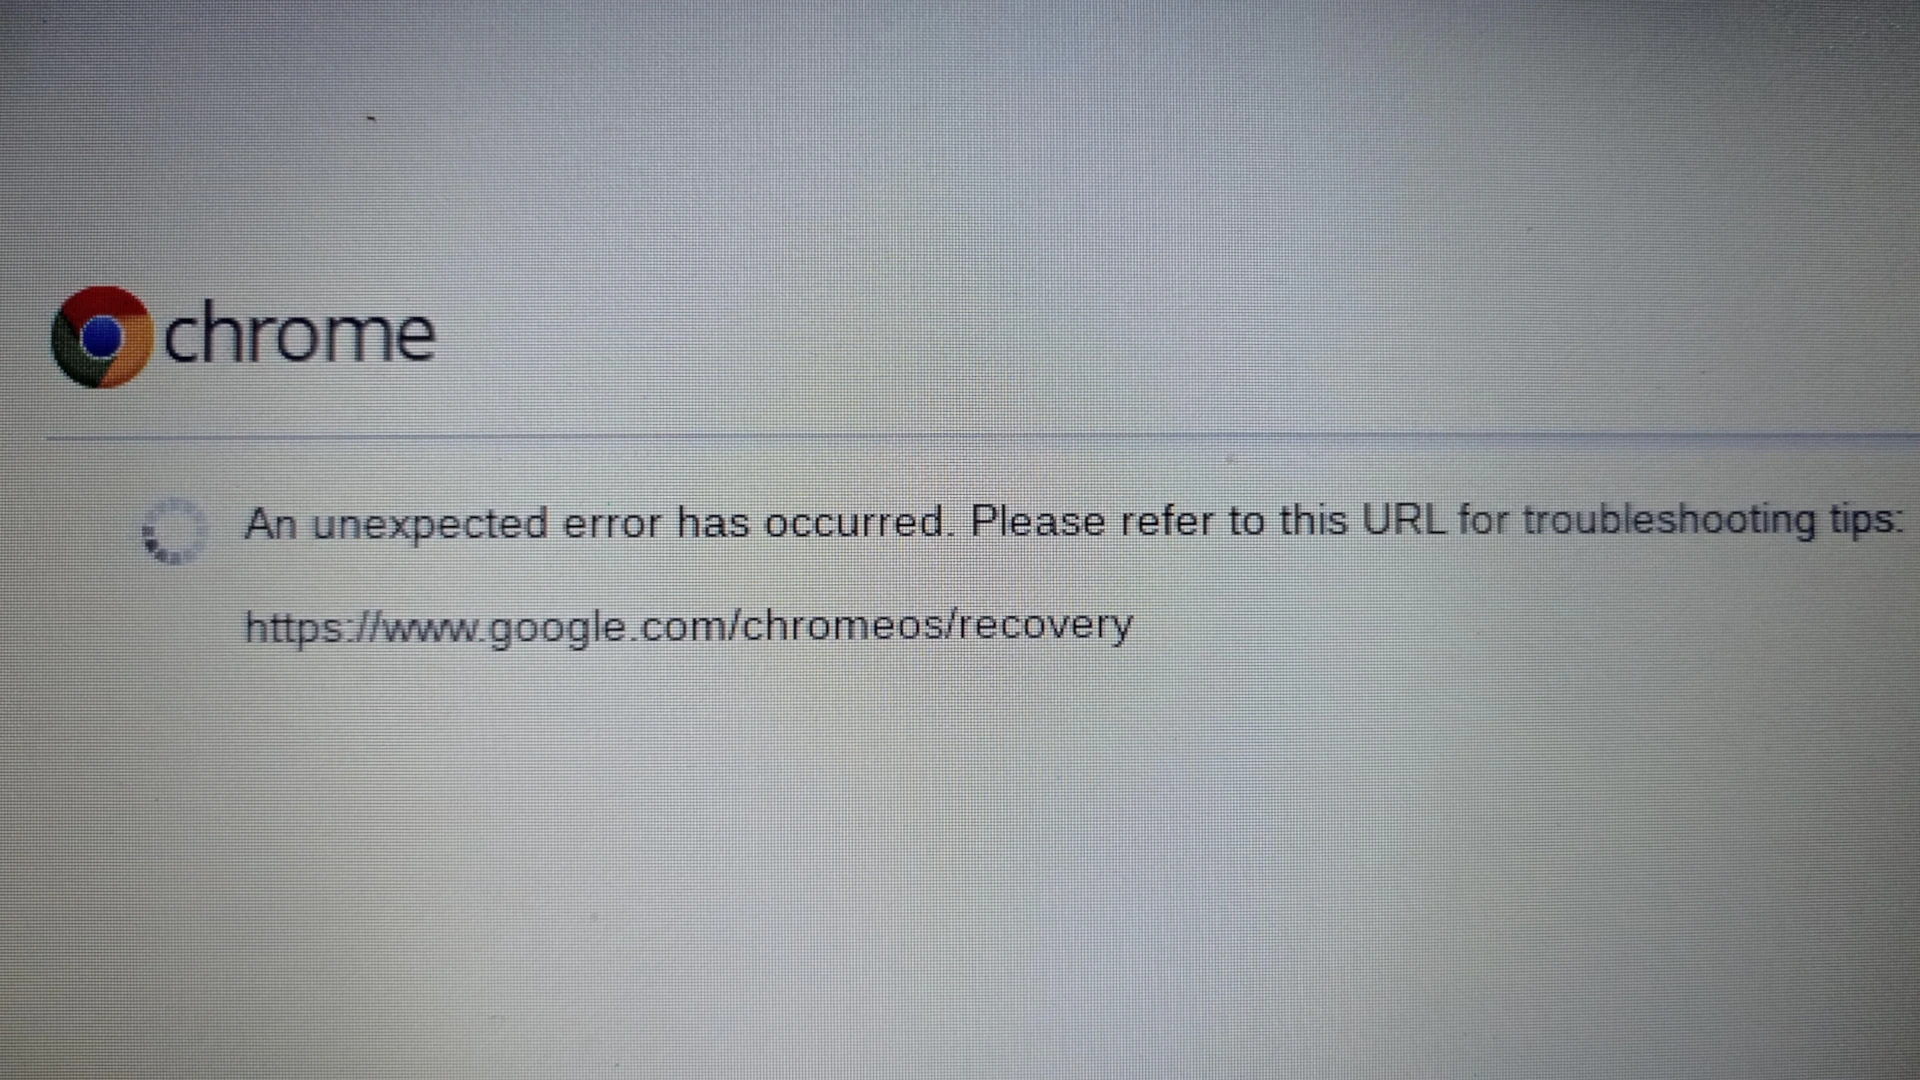 Chromebook: An Unexpected Error Has Occurred